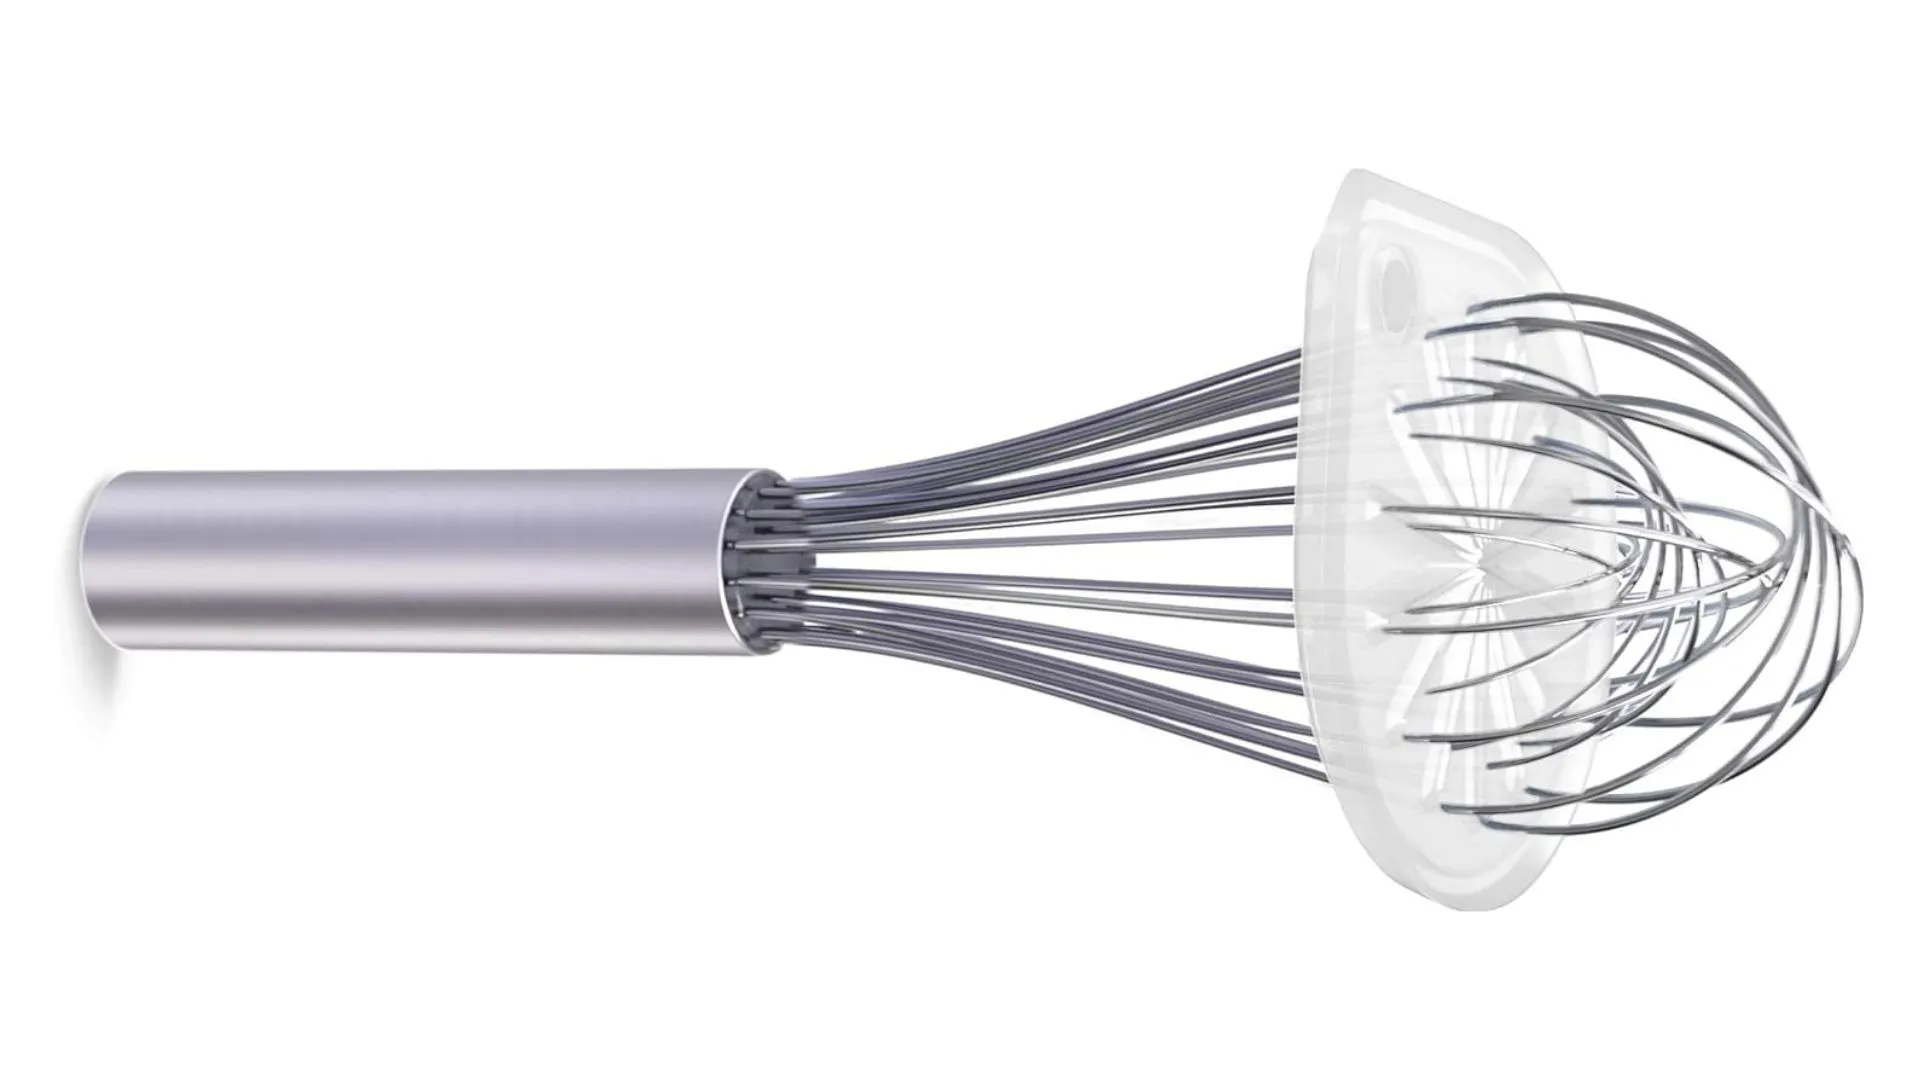 Whisk Wiper review